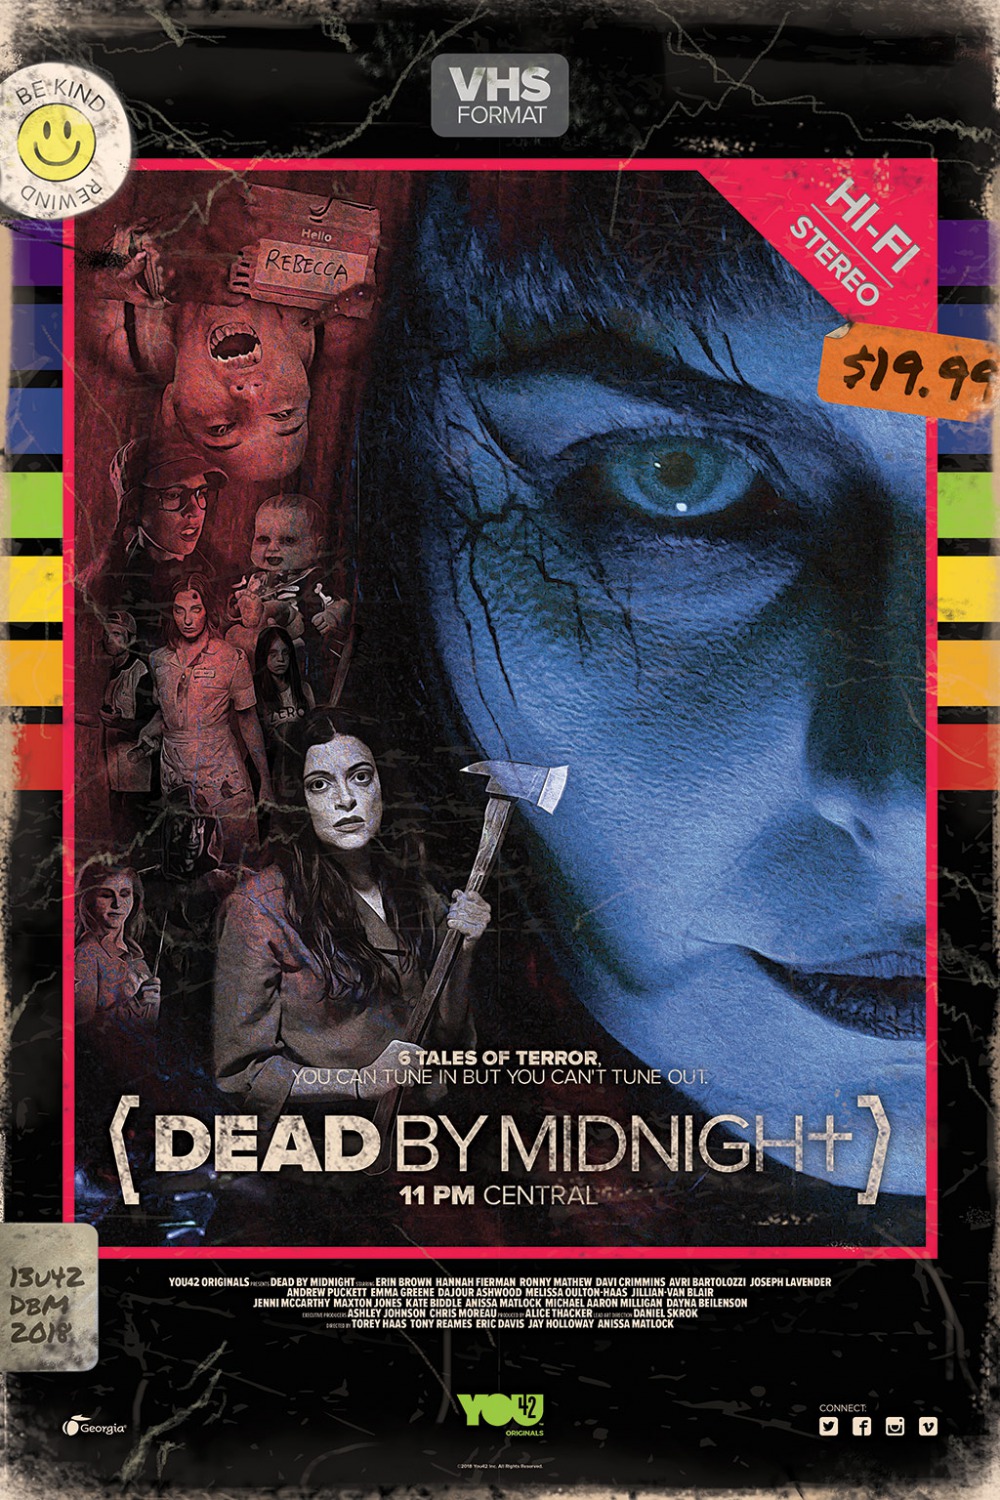 Extra Large TV Poster Image for Dead by Midnight (11pm Central) 